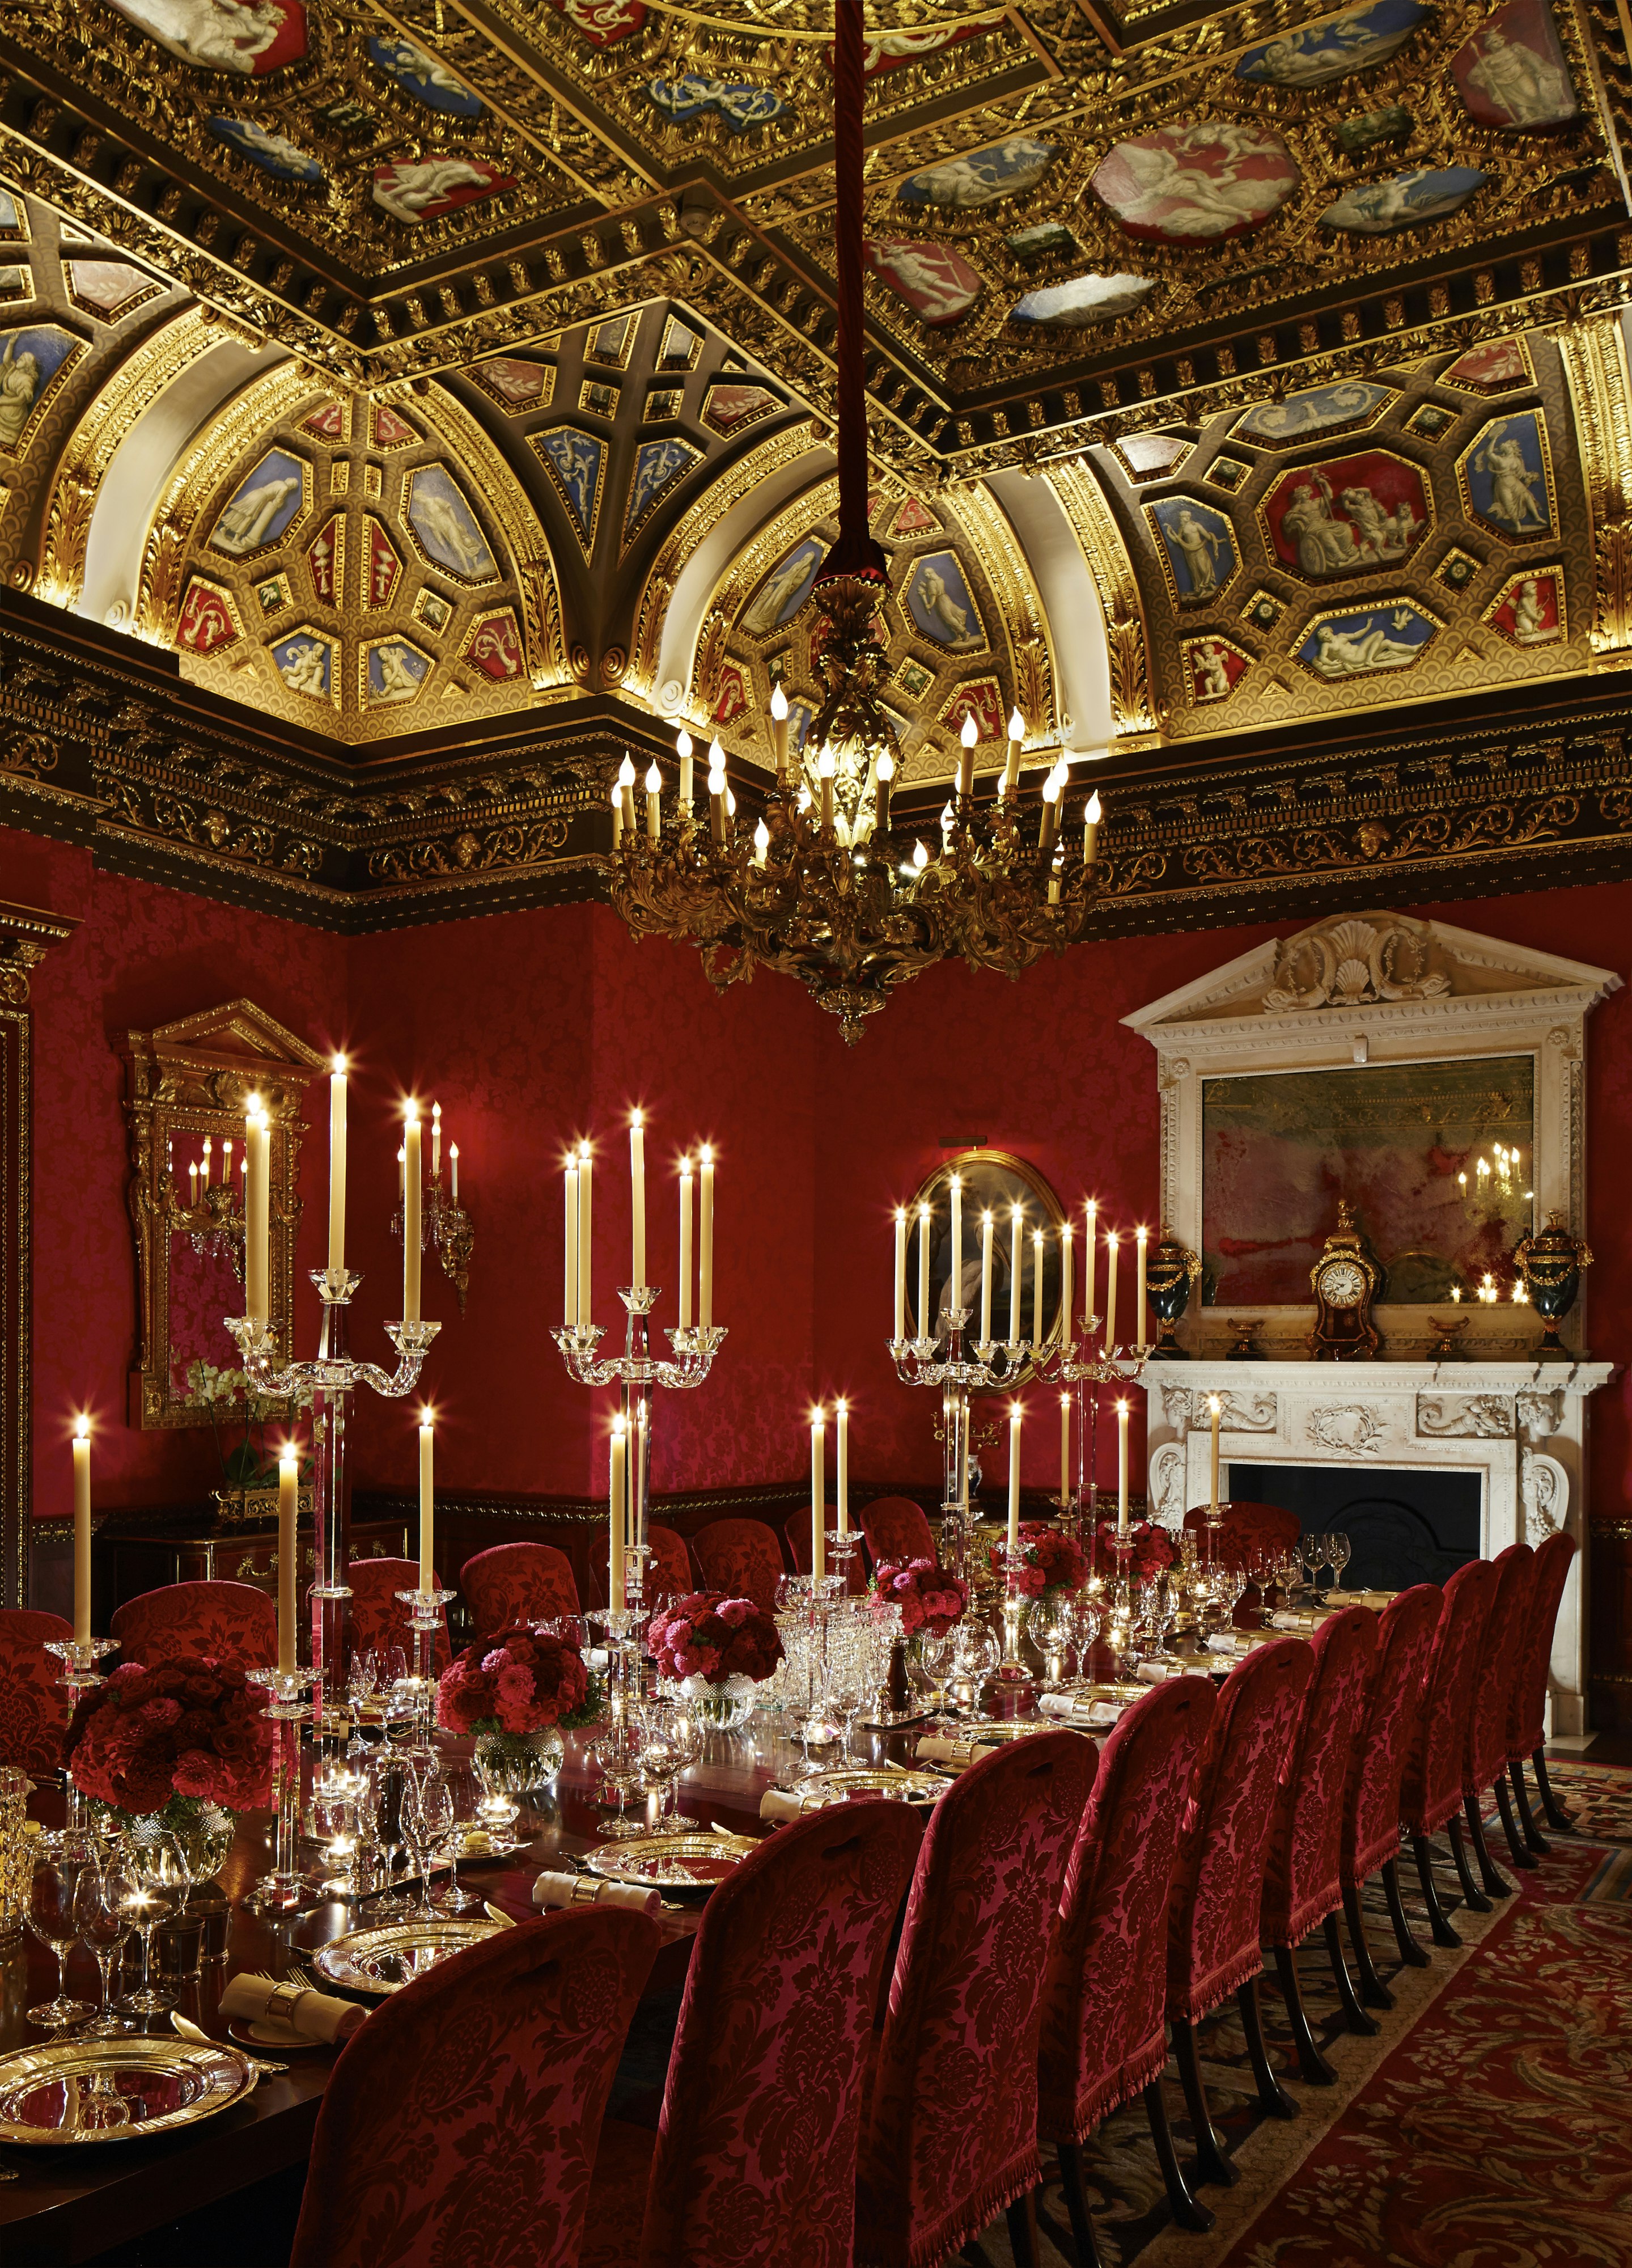 The Ritz London - The William Kent Room image 3